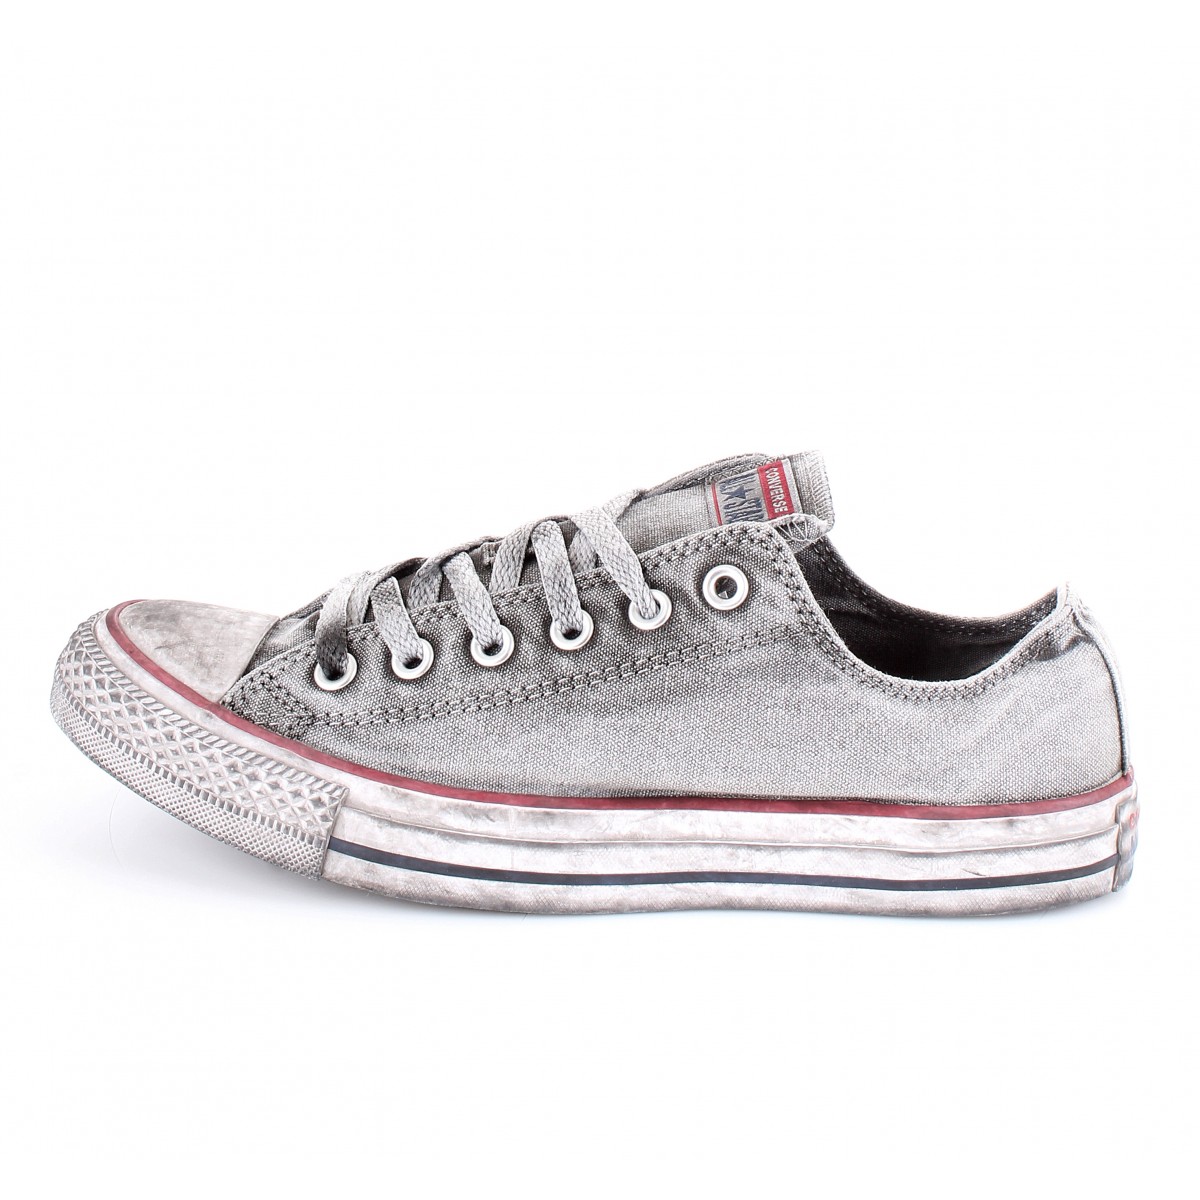 Converse All Star Chuck taylor Limited Edition